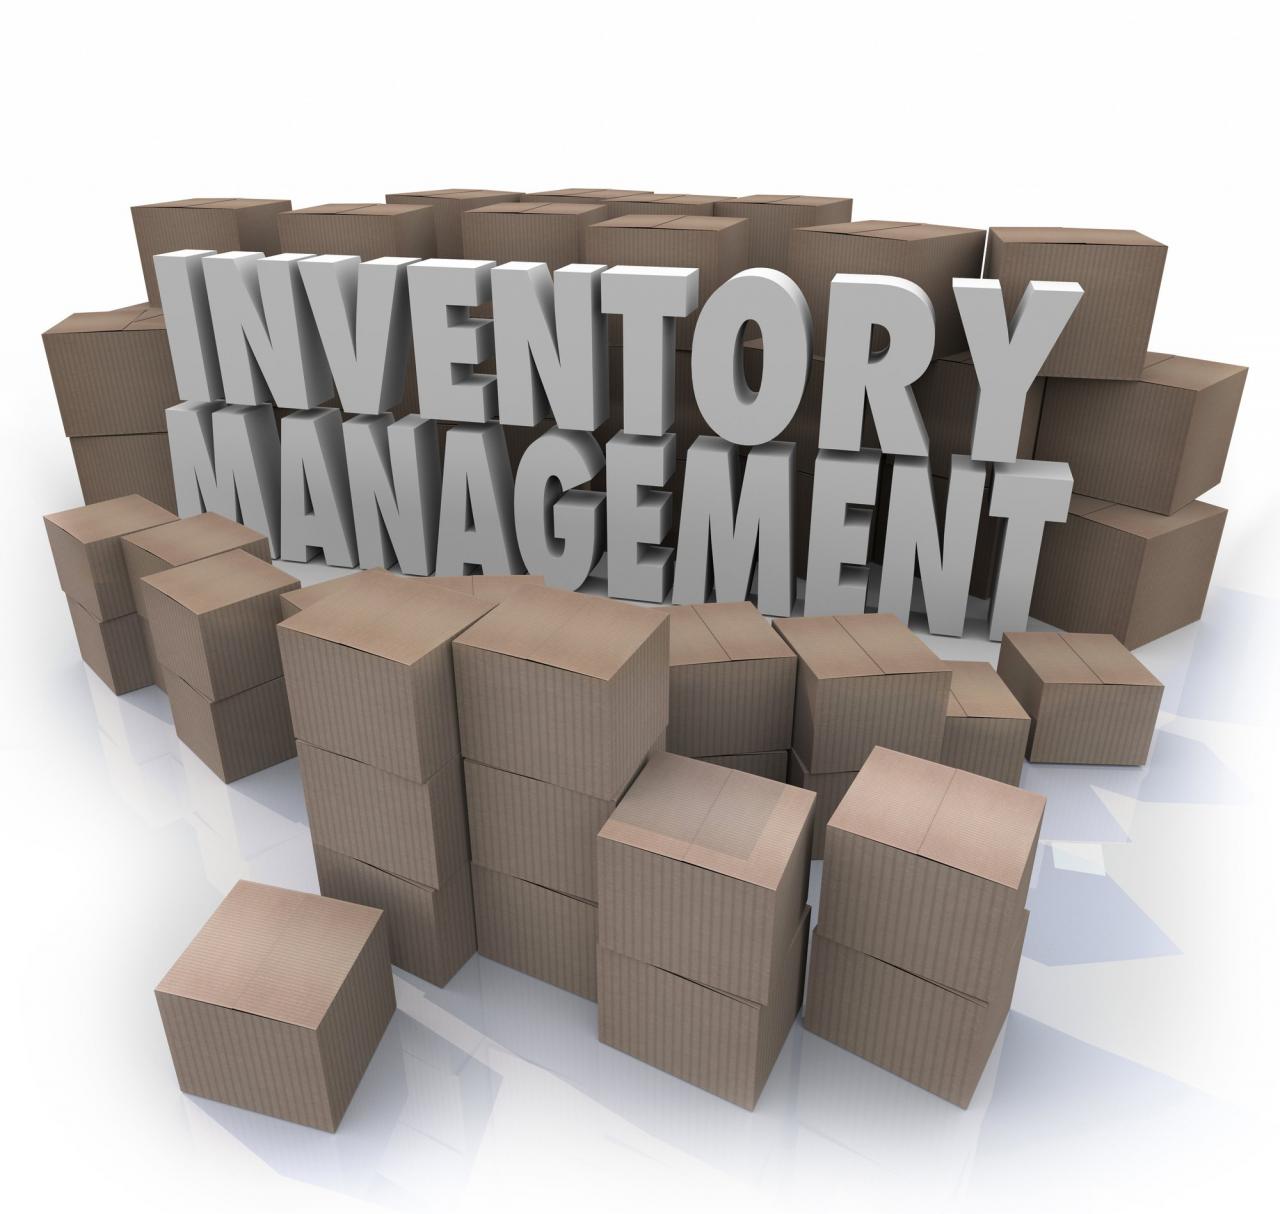 How to manage an inventory